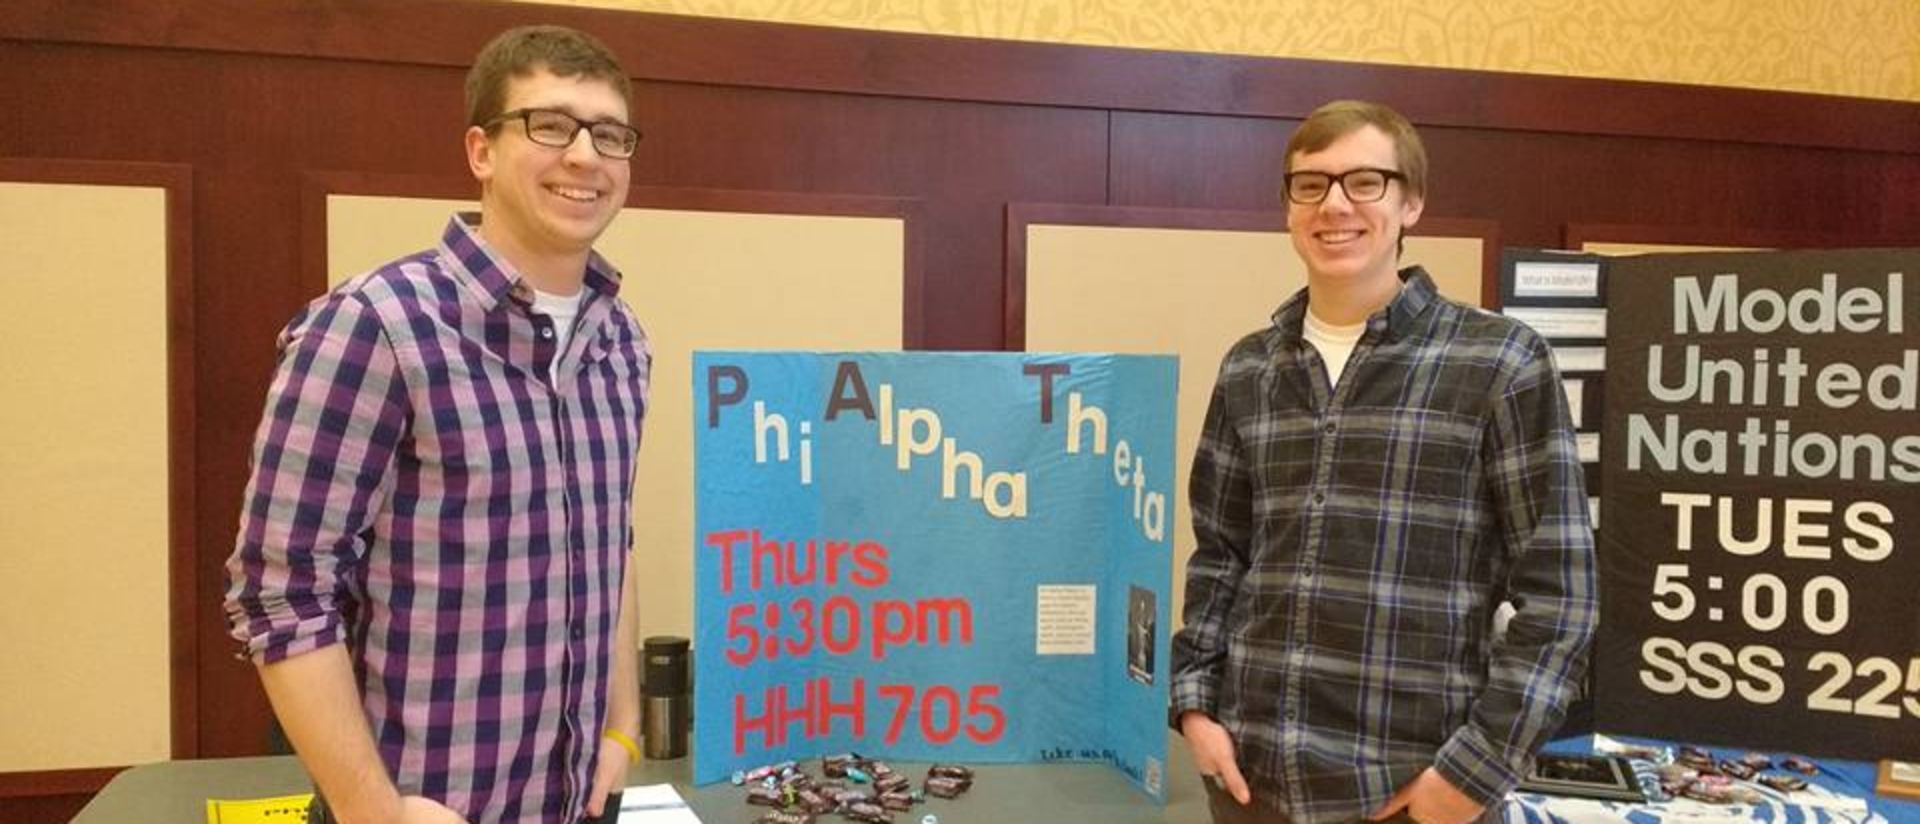 Students with the history student organization, Phi Alpha Theta, stand next to table display